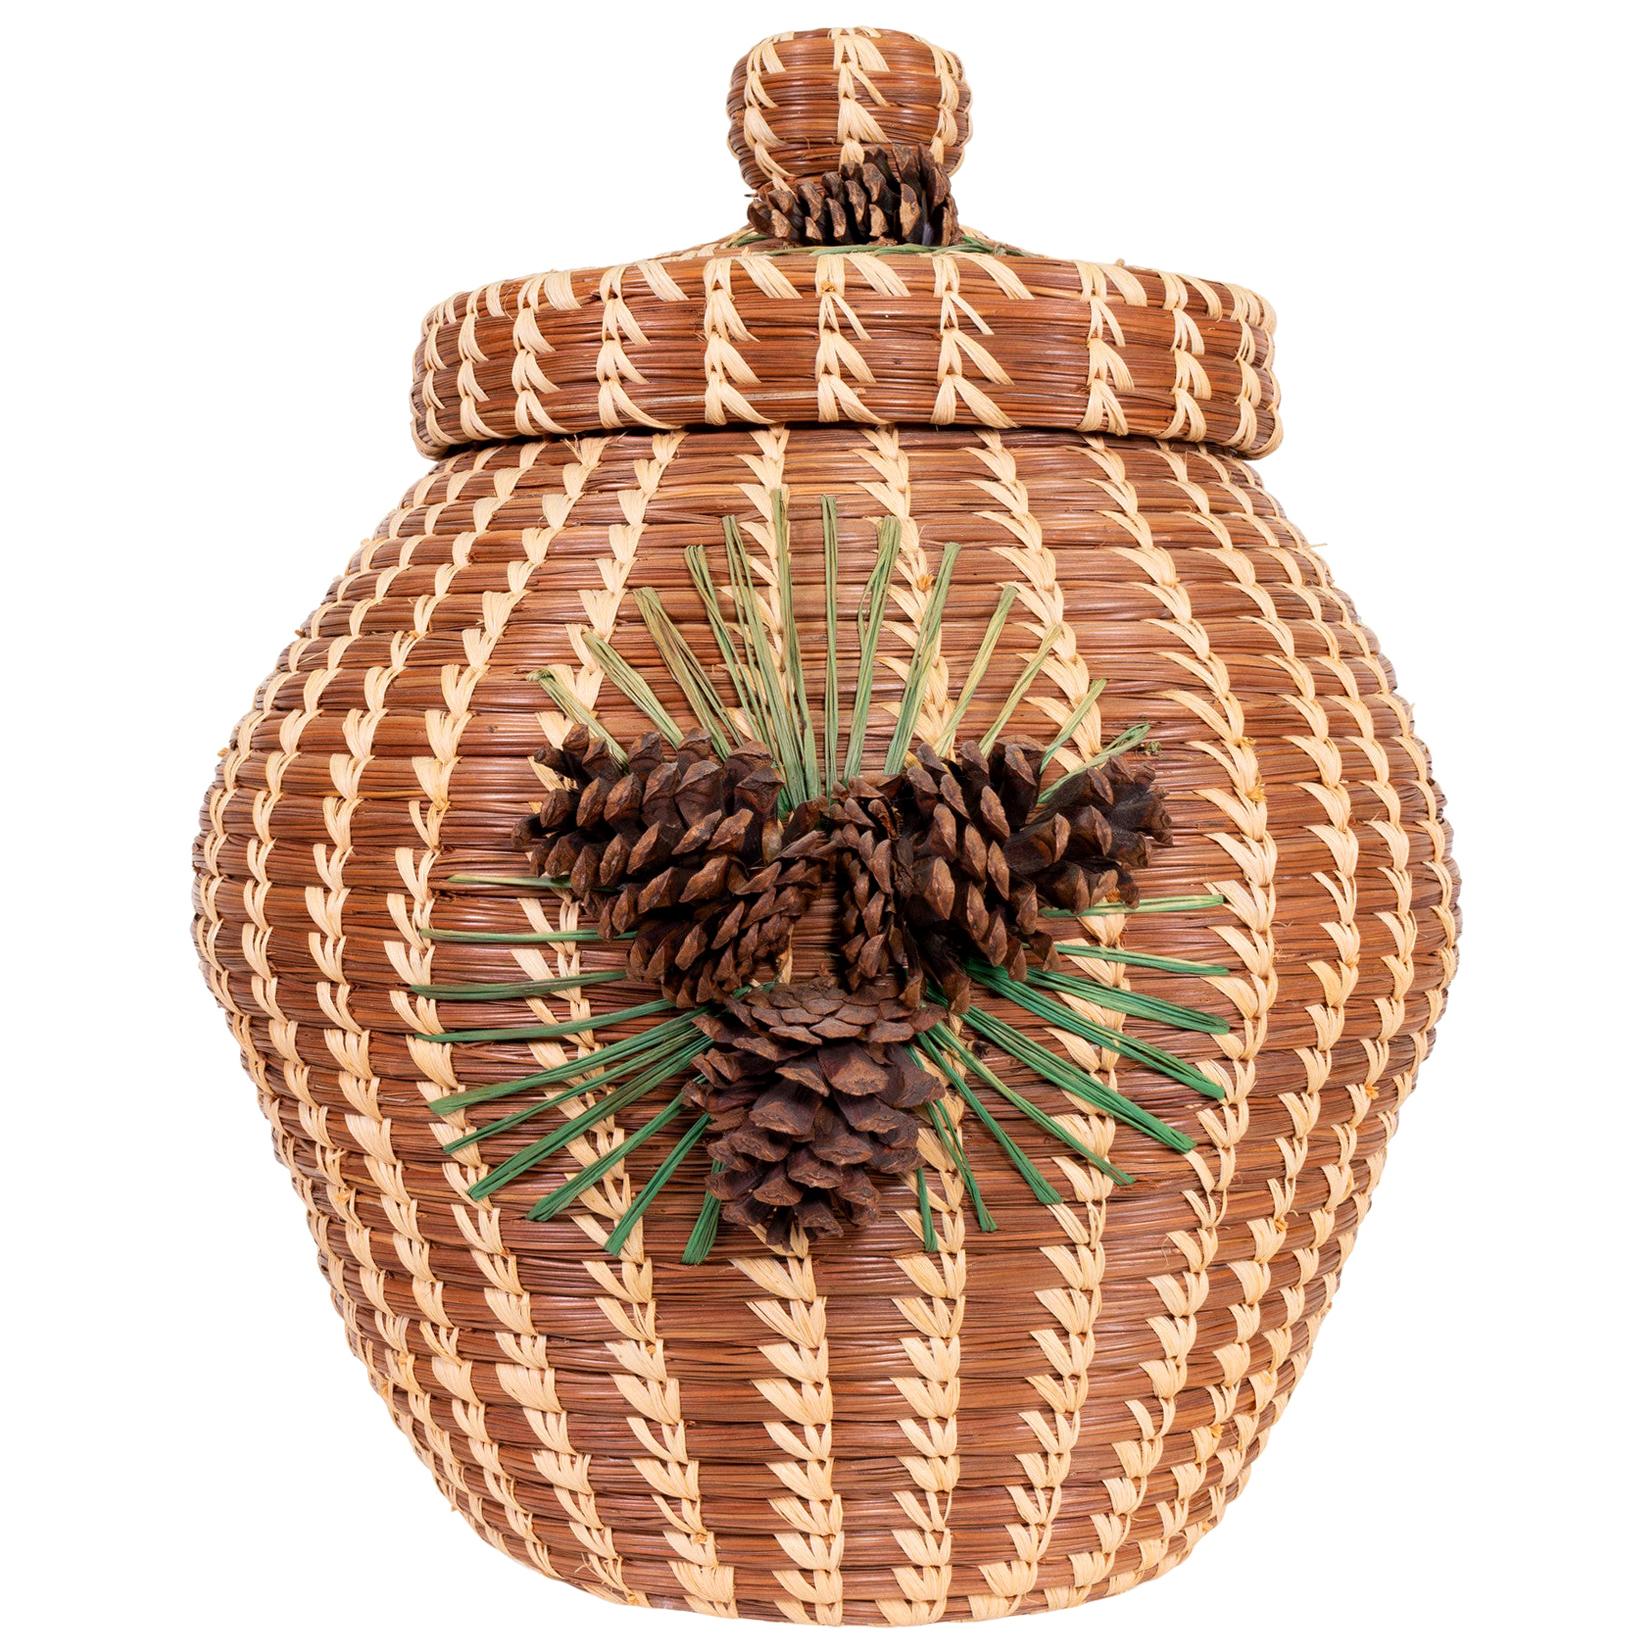 Vintage First Nations Native Large Cedar and Pine Needle Woven Handled Basket